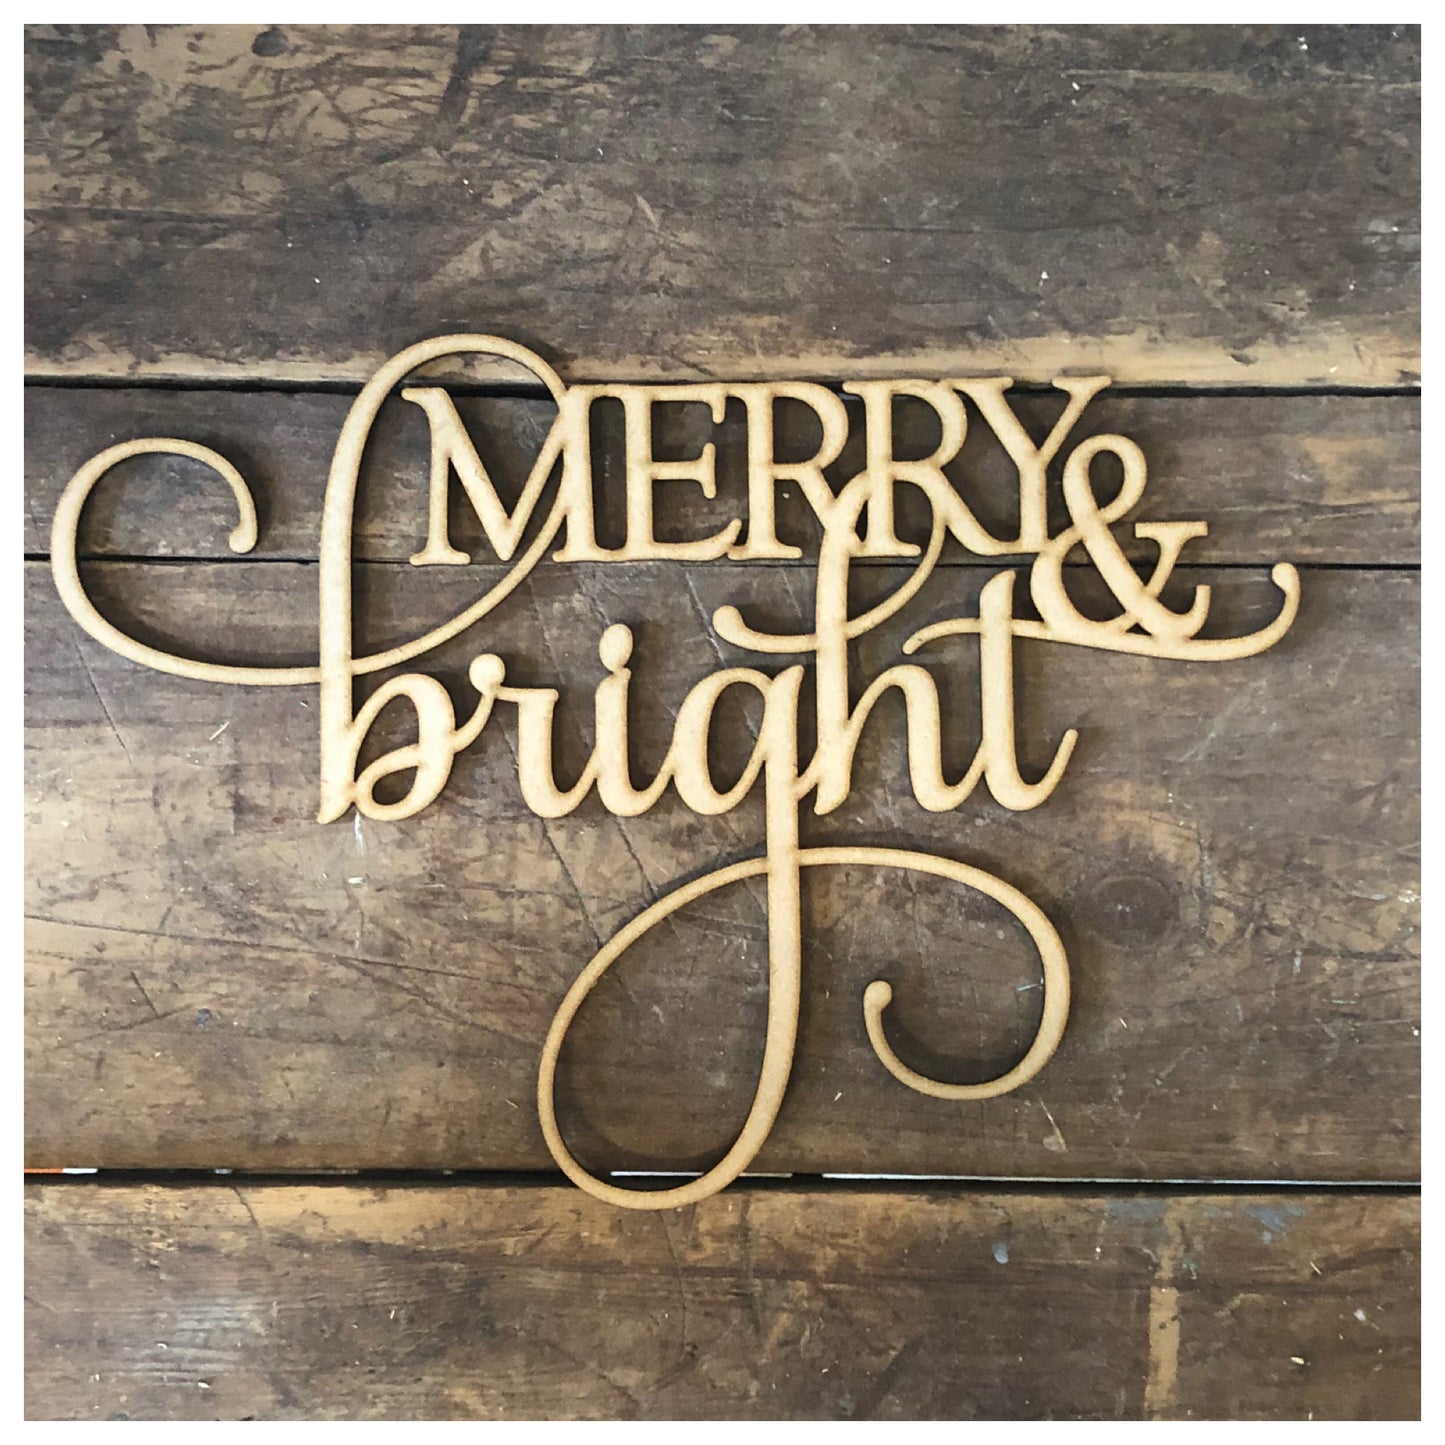 MERRY & bright Laser Cut Out